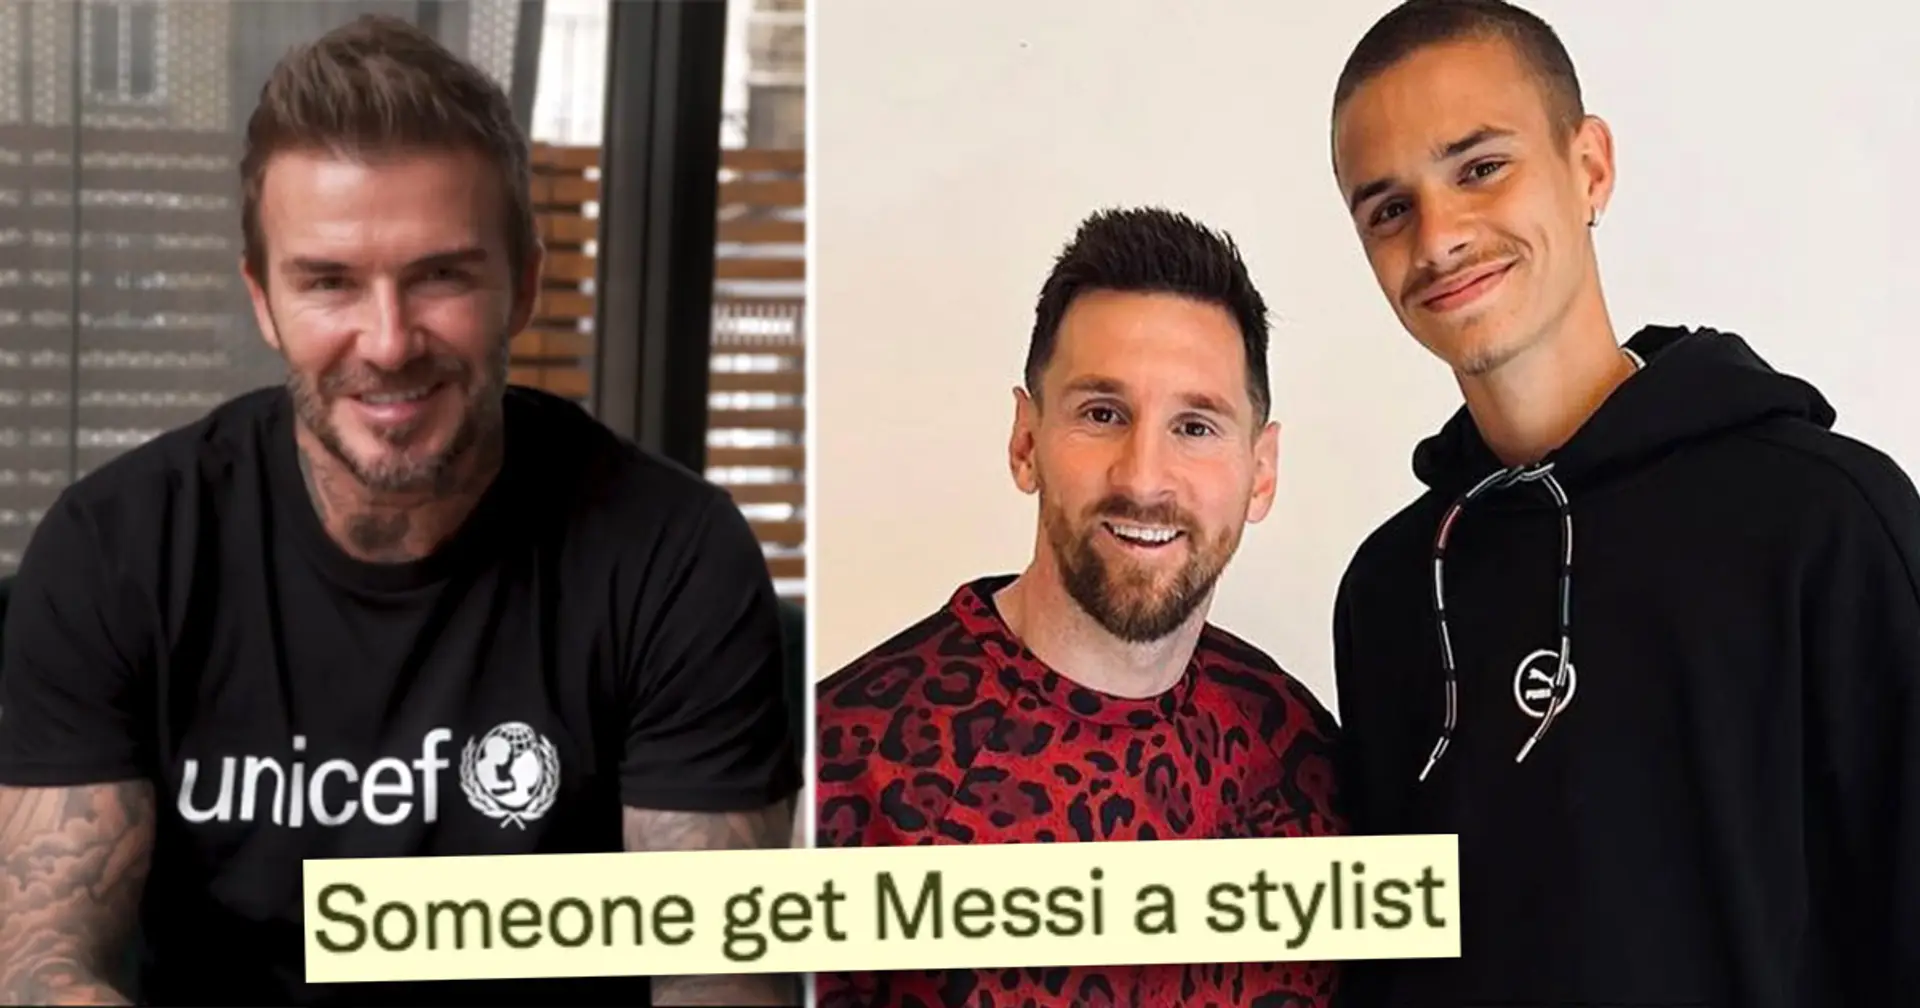 'Paris changed my man': Fans react to Messi's new look as he meets David Beckham's son